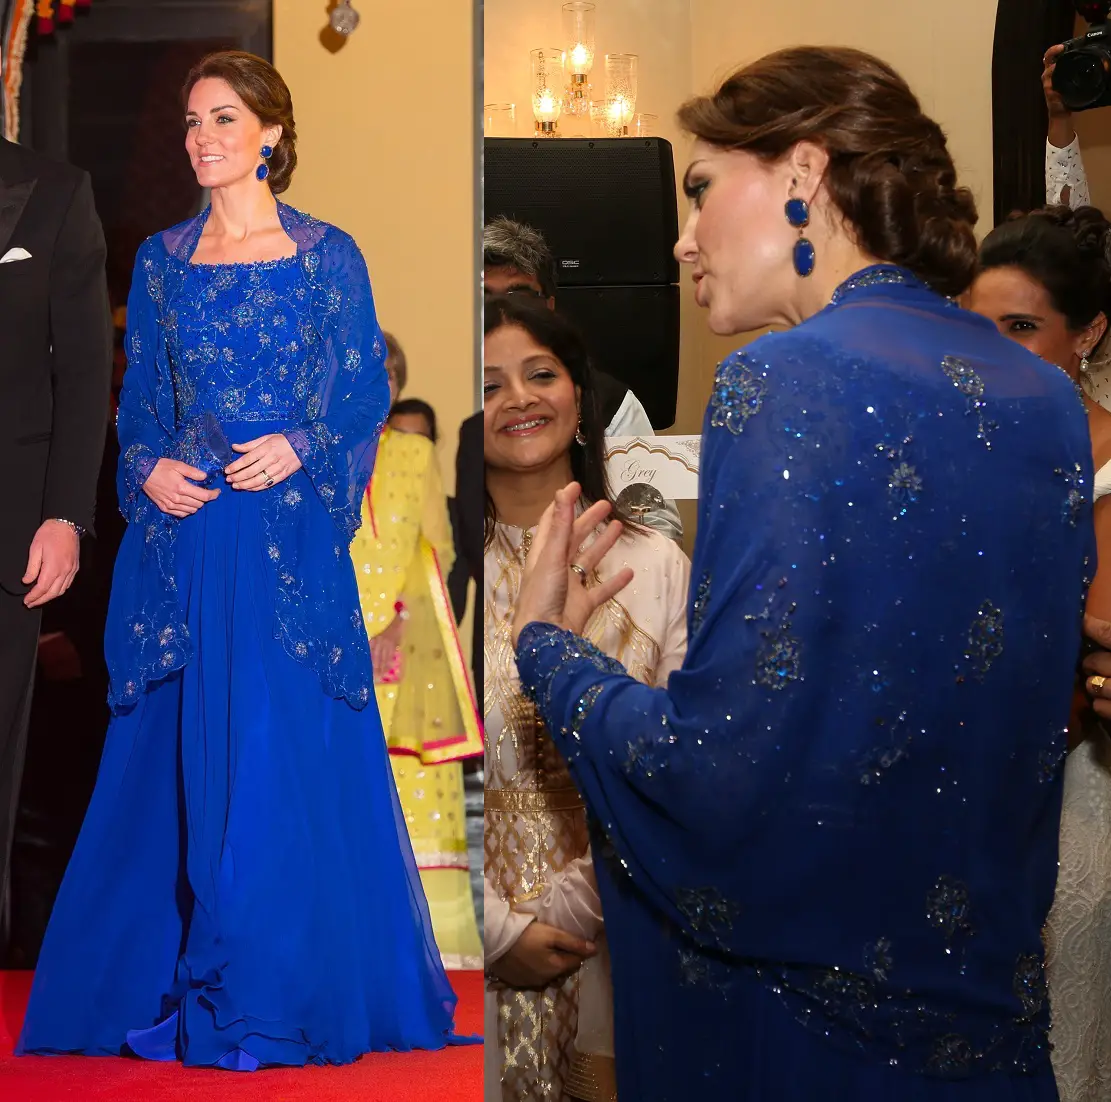 Duchess of Cambridge wore blue Jenny Packham Gown at the Bollywood Gala during India visit in 2016